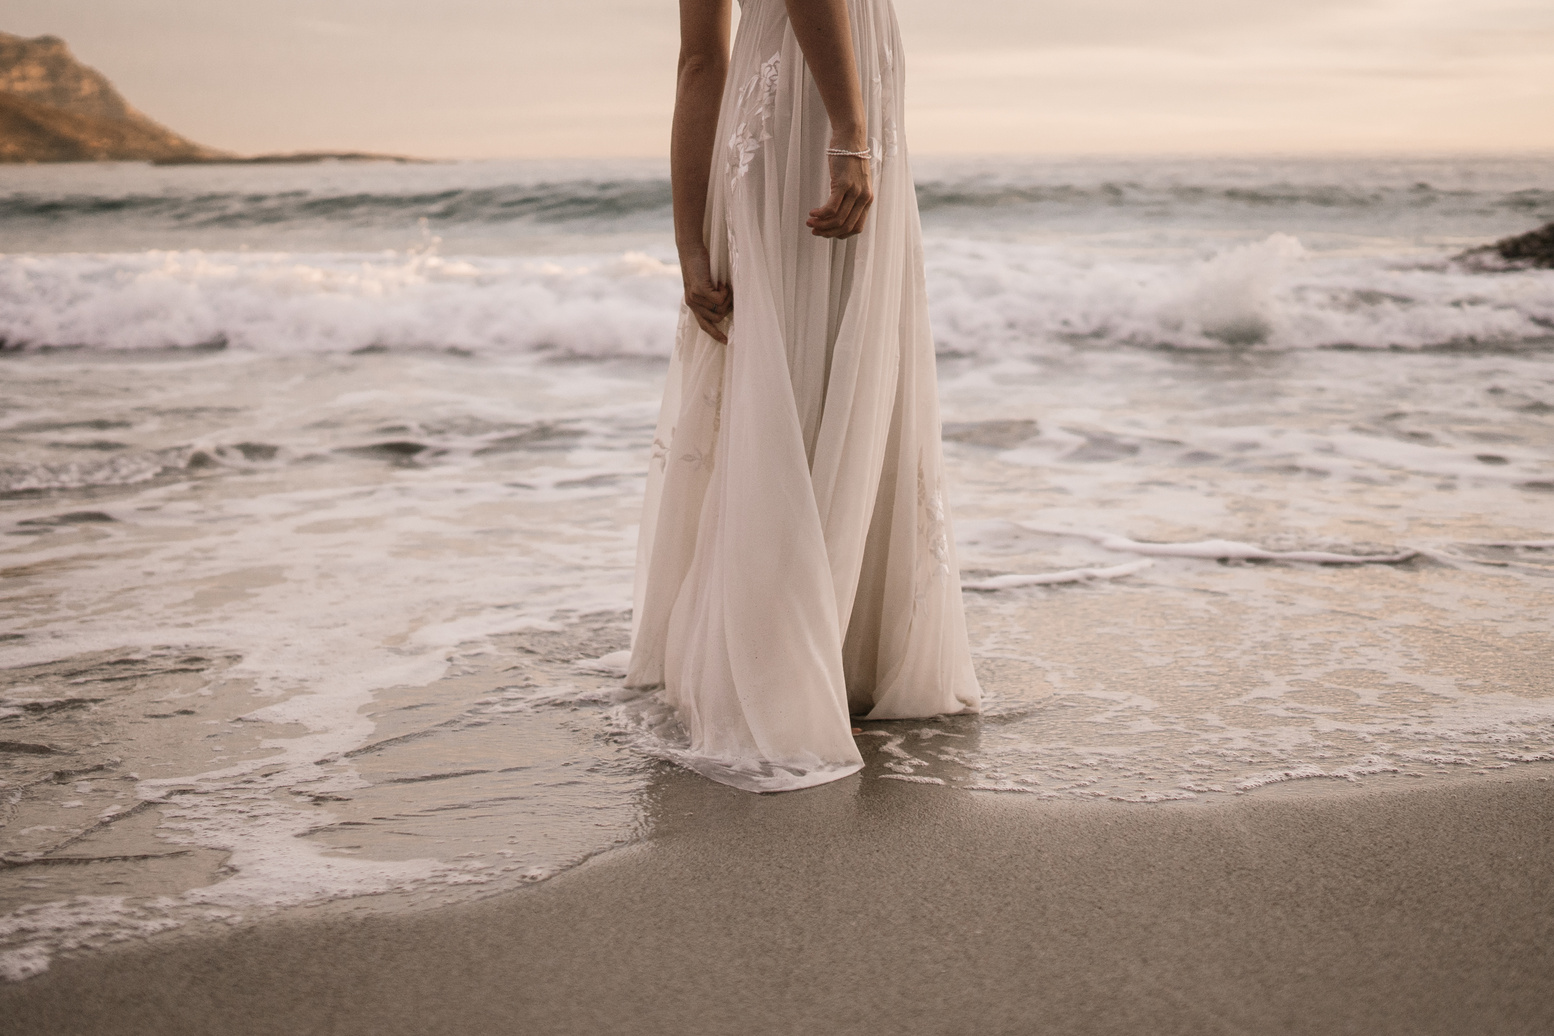 Woman in White Long Dress Standing on Beach